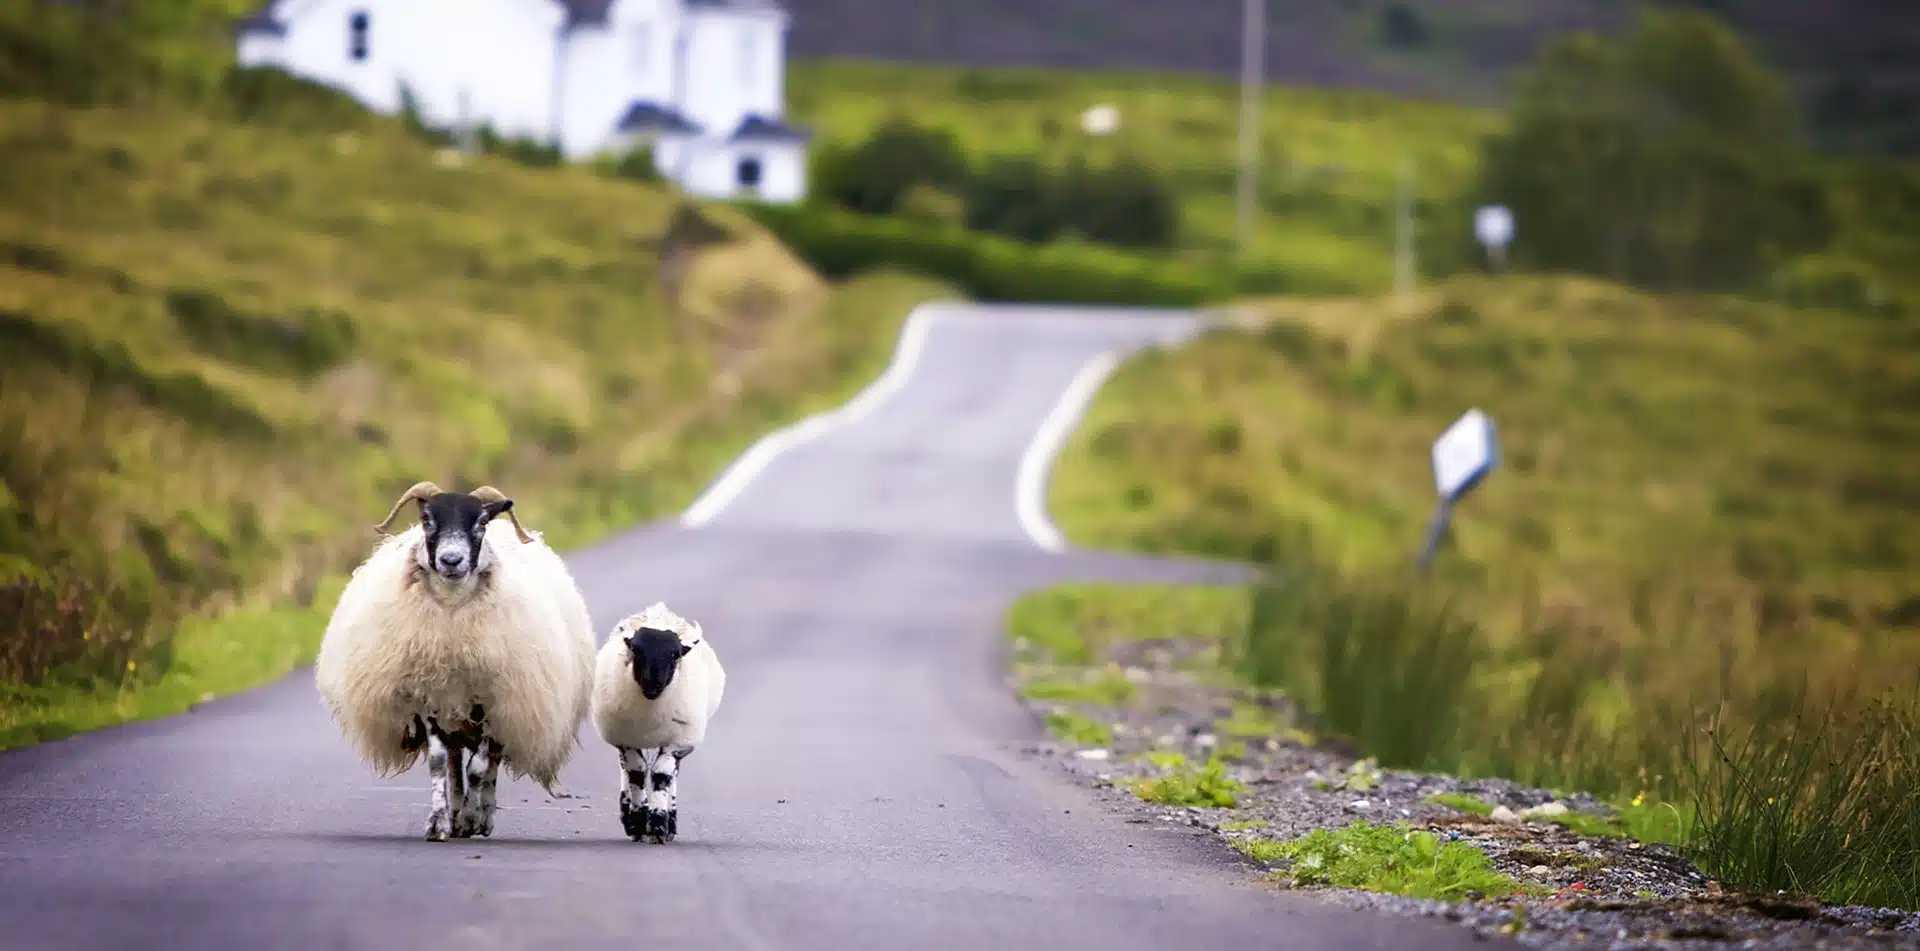 Two Sheep Walking on a Road in Scotland